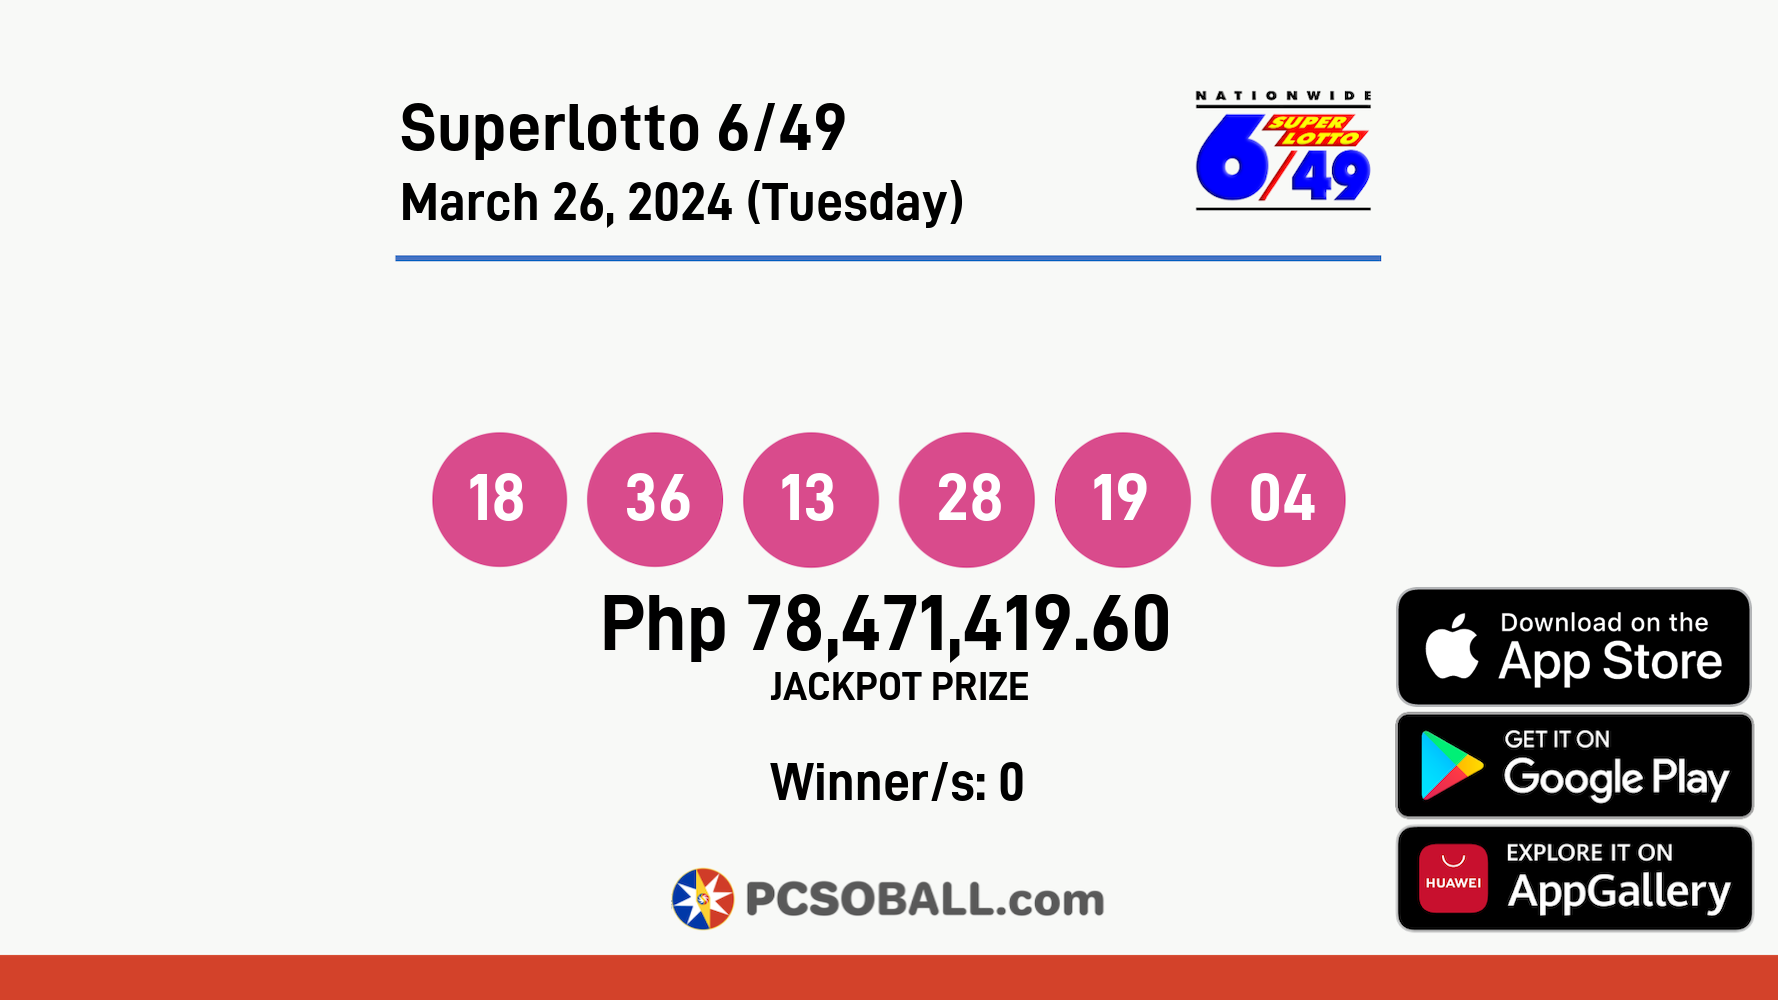 Superlotto 6/49 March 26, 2024 (Tuesday) Result